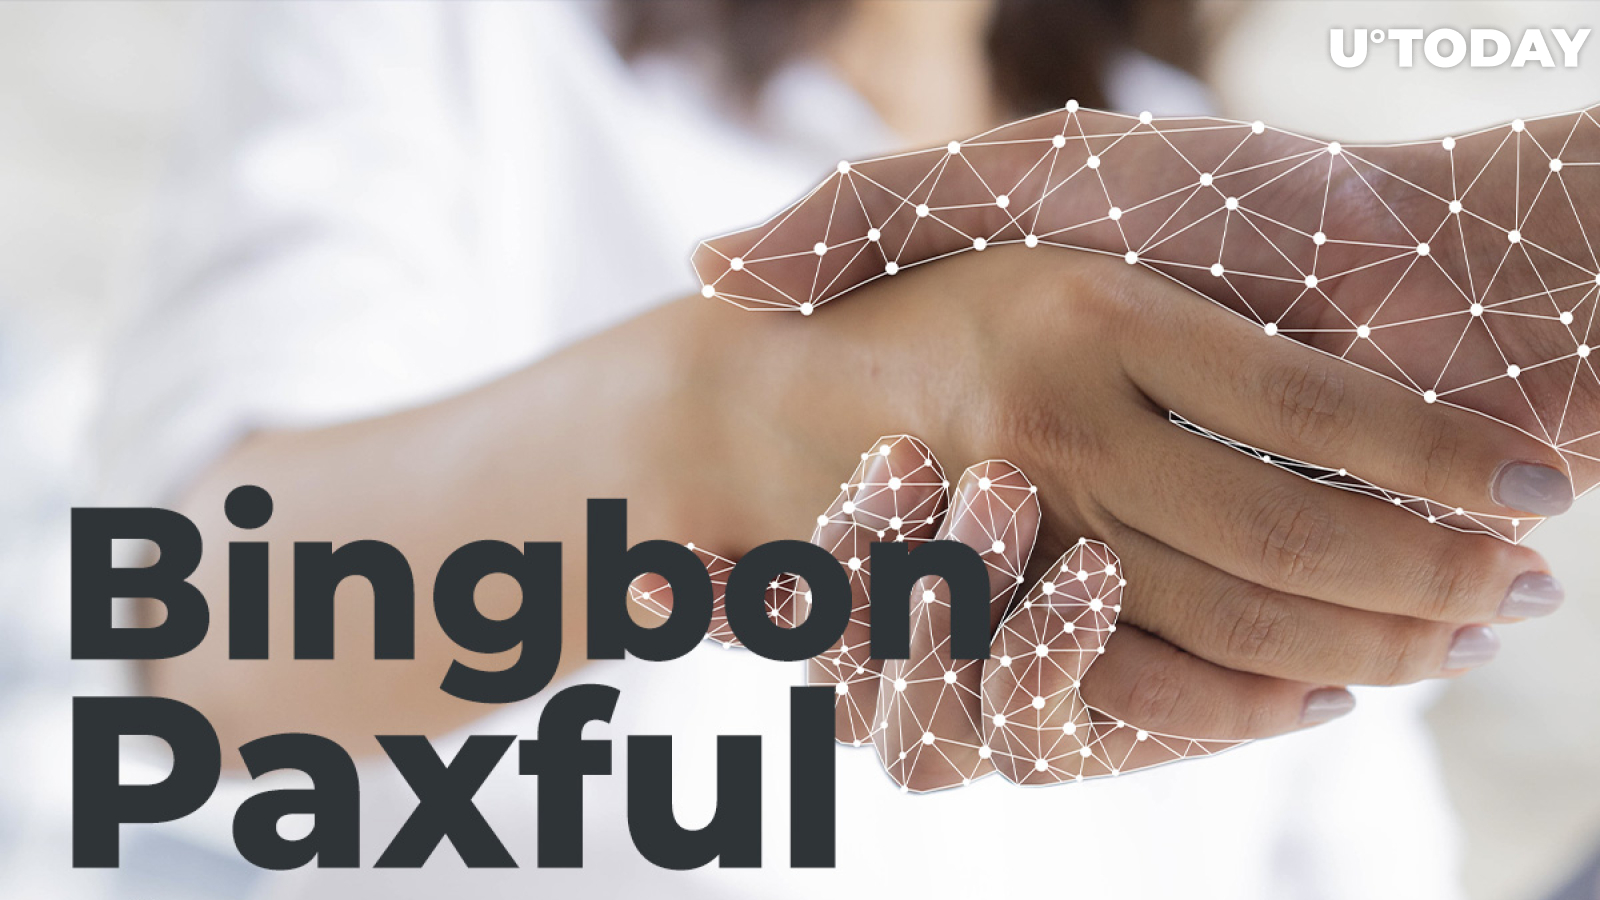 Social Trading Platform Bingbon Has Partnered with Paxful Fiat-to-Crypto Exchange